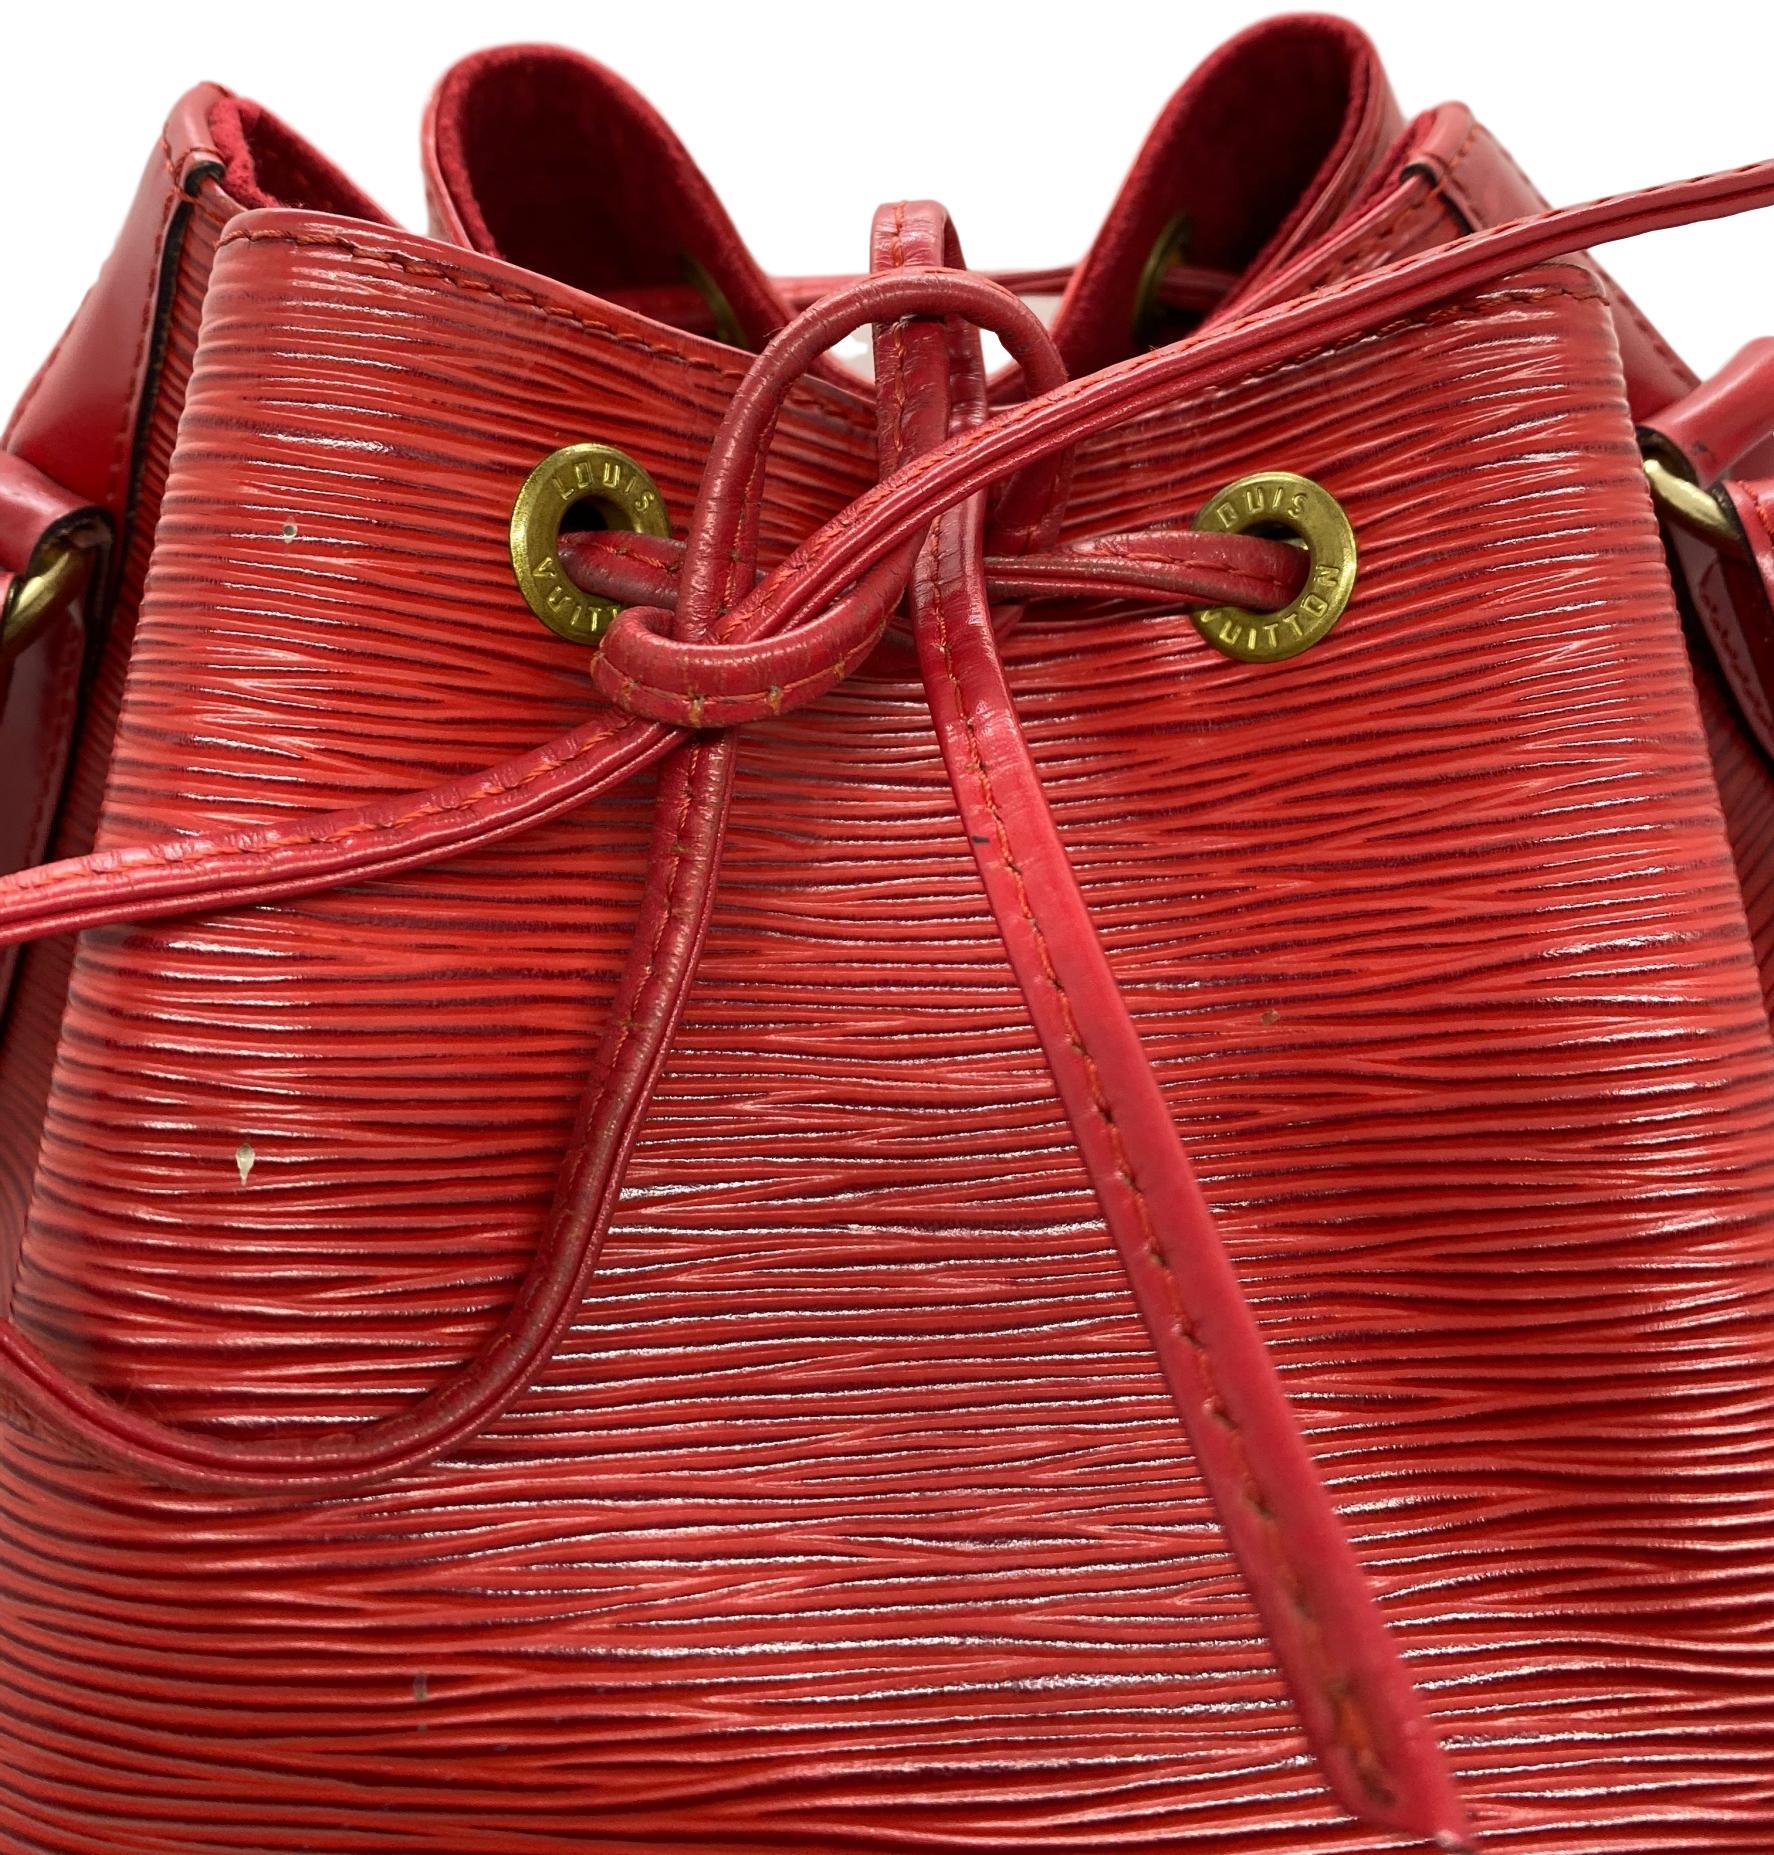 Louis Vuitton Noe PM Bucket Bag in Red EPI Leather, June 1995. 2